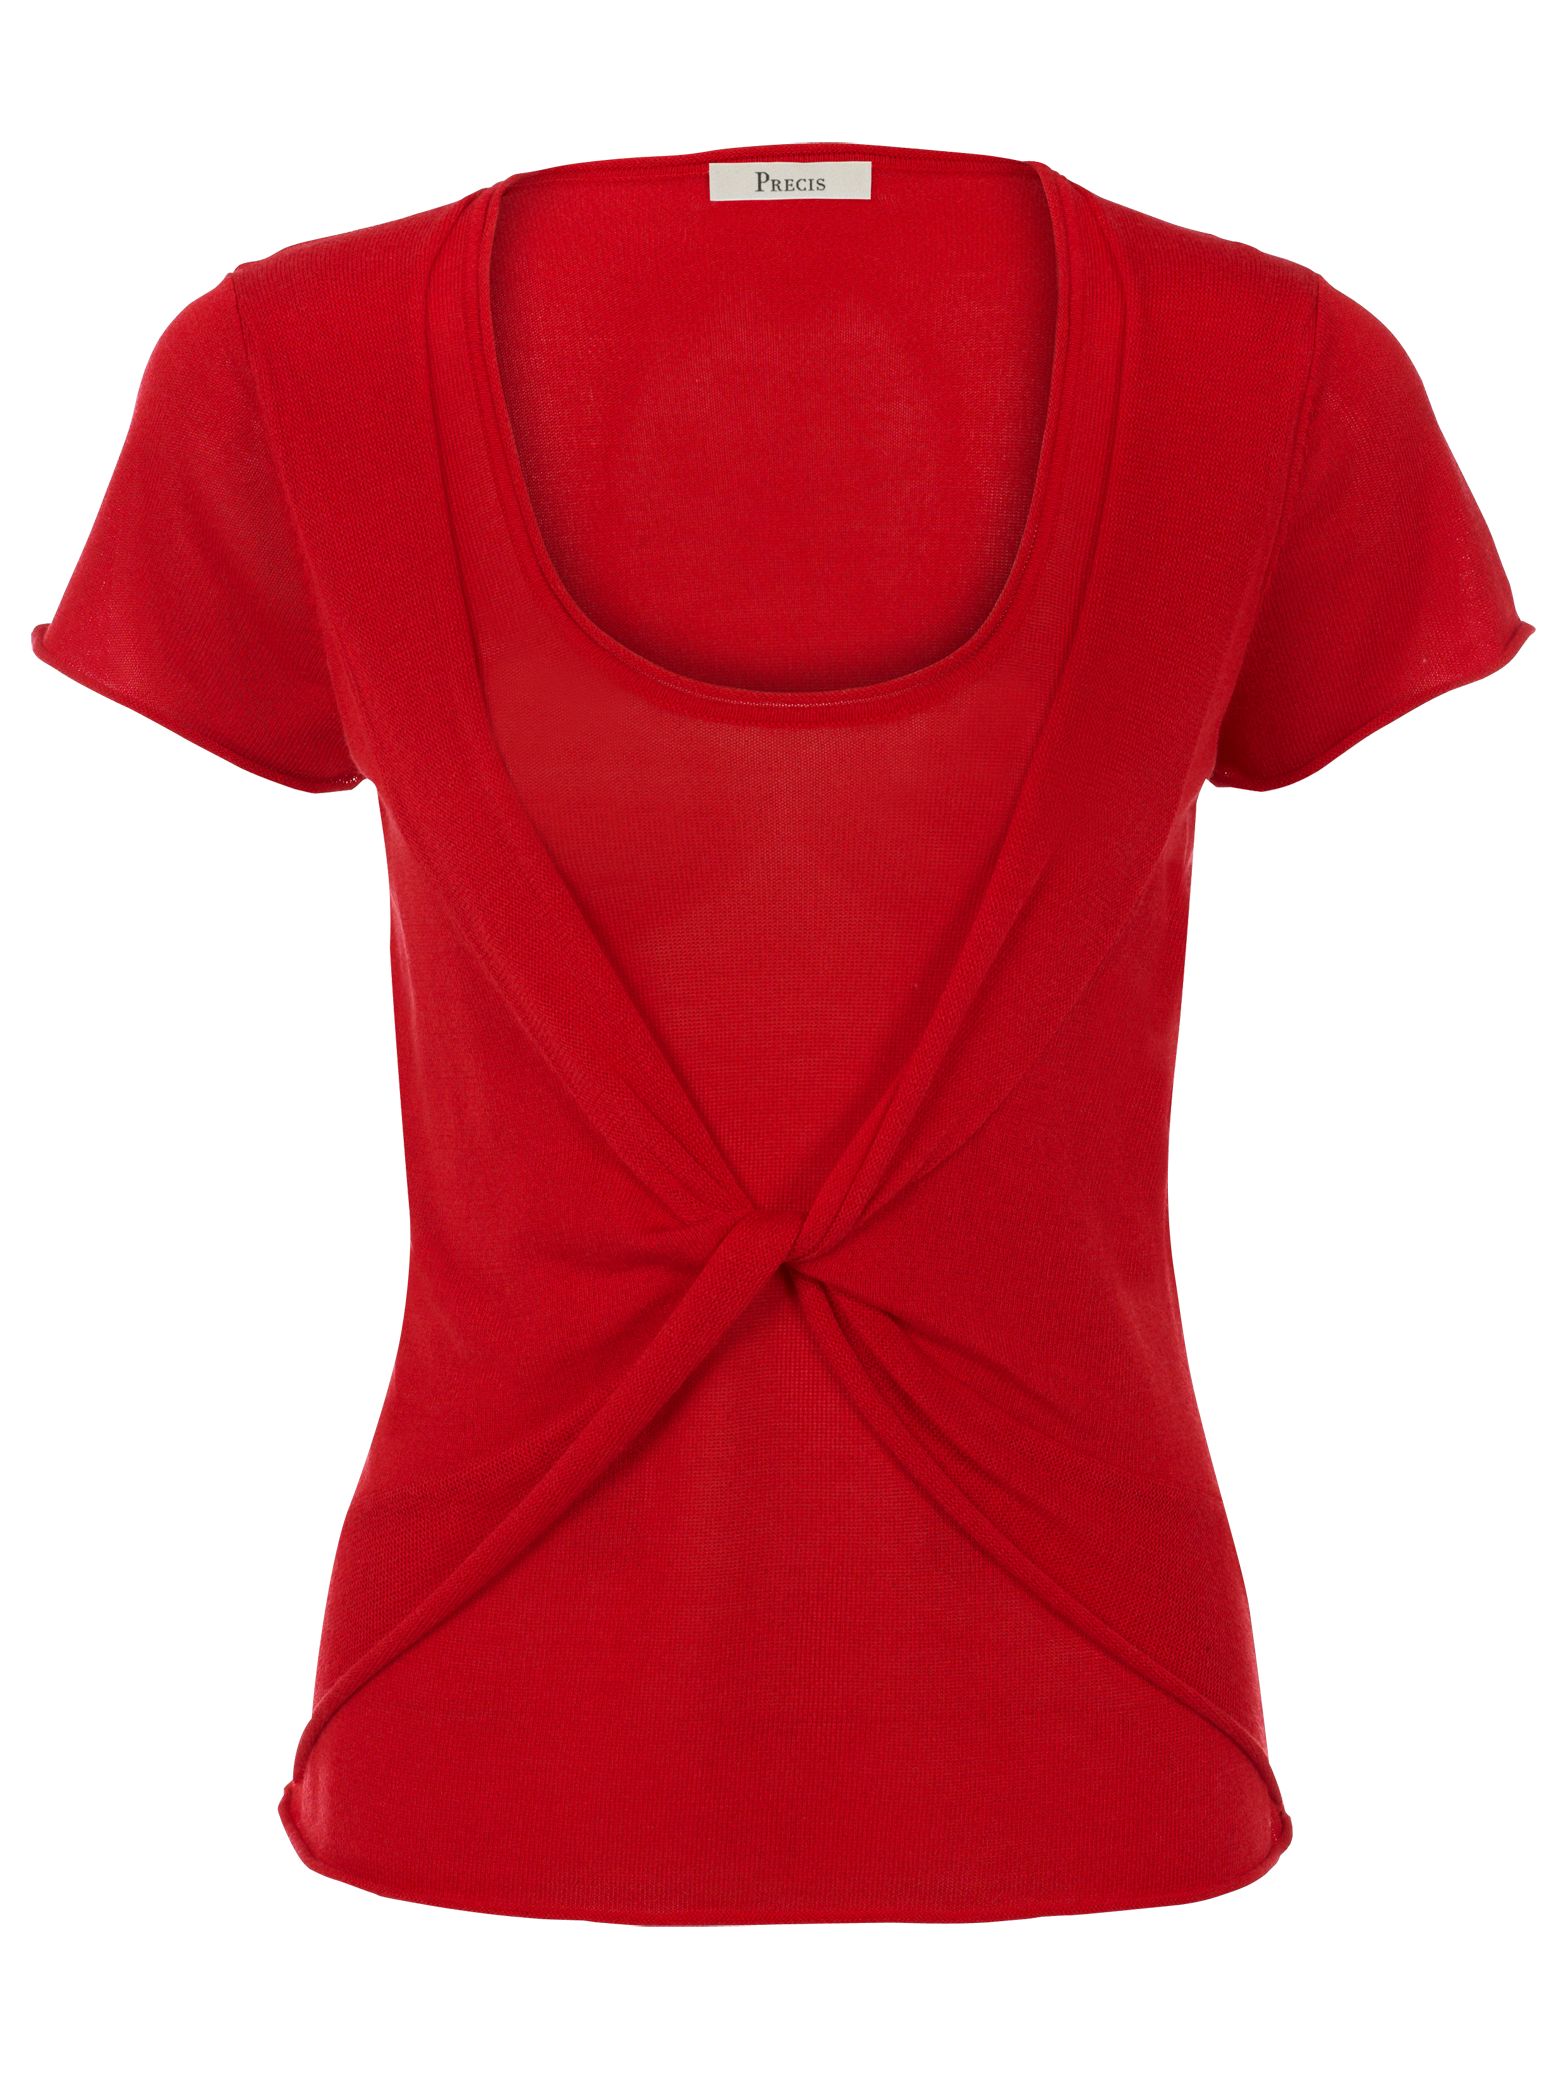 Twisted Front Detail T-Shirt,